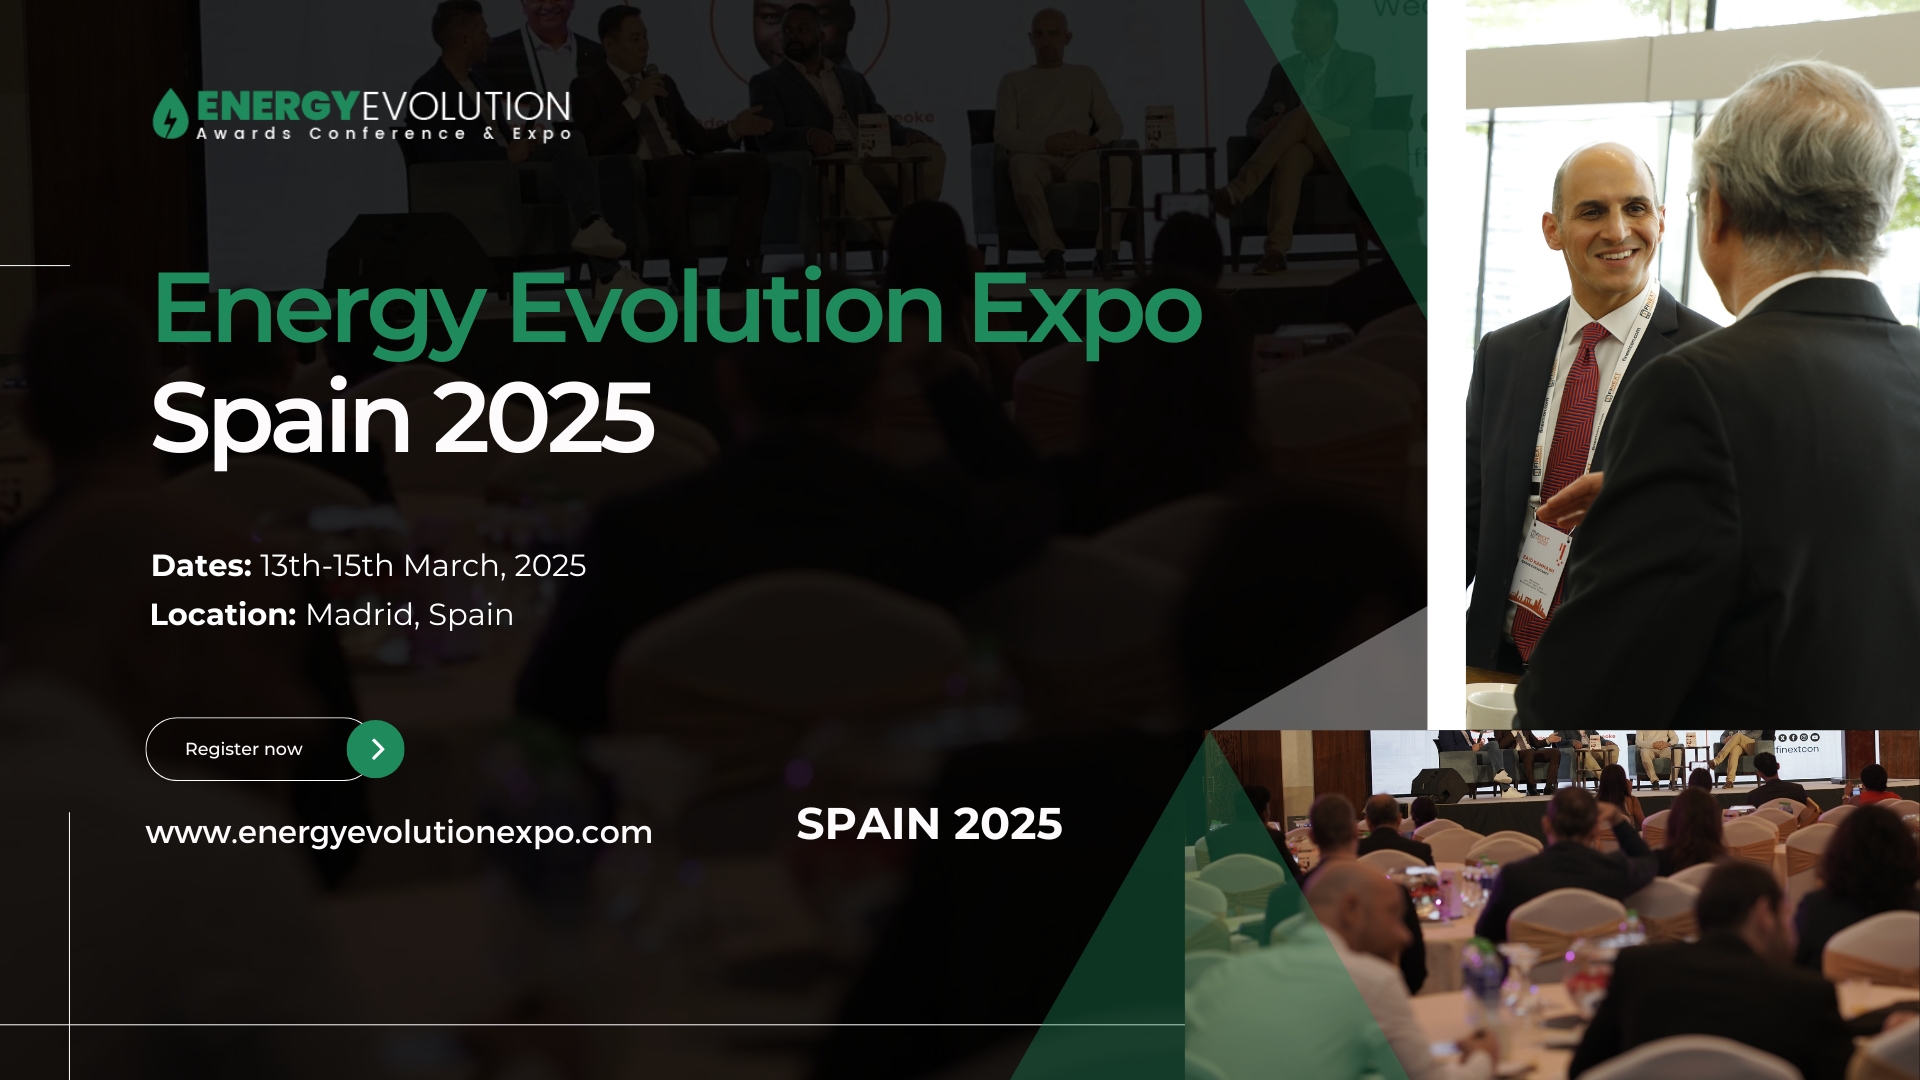 Energy Evolution Awards, Conference & Expo 2025, Madrid, Spain